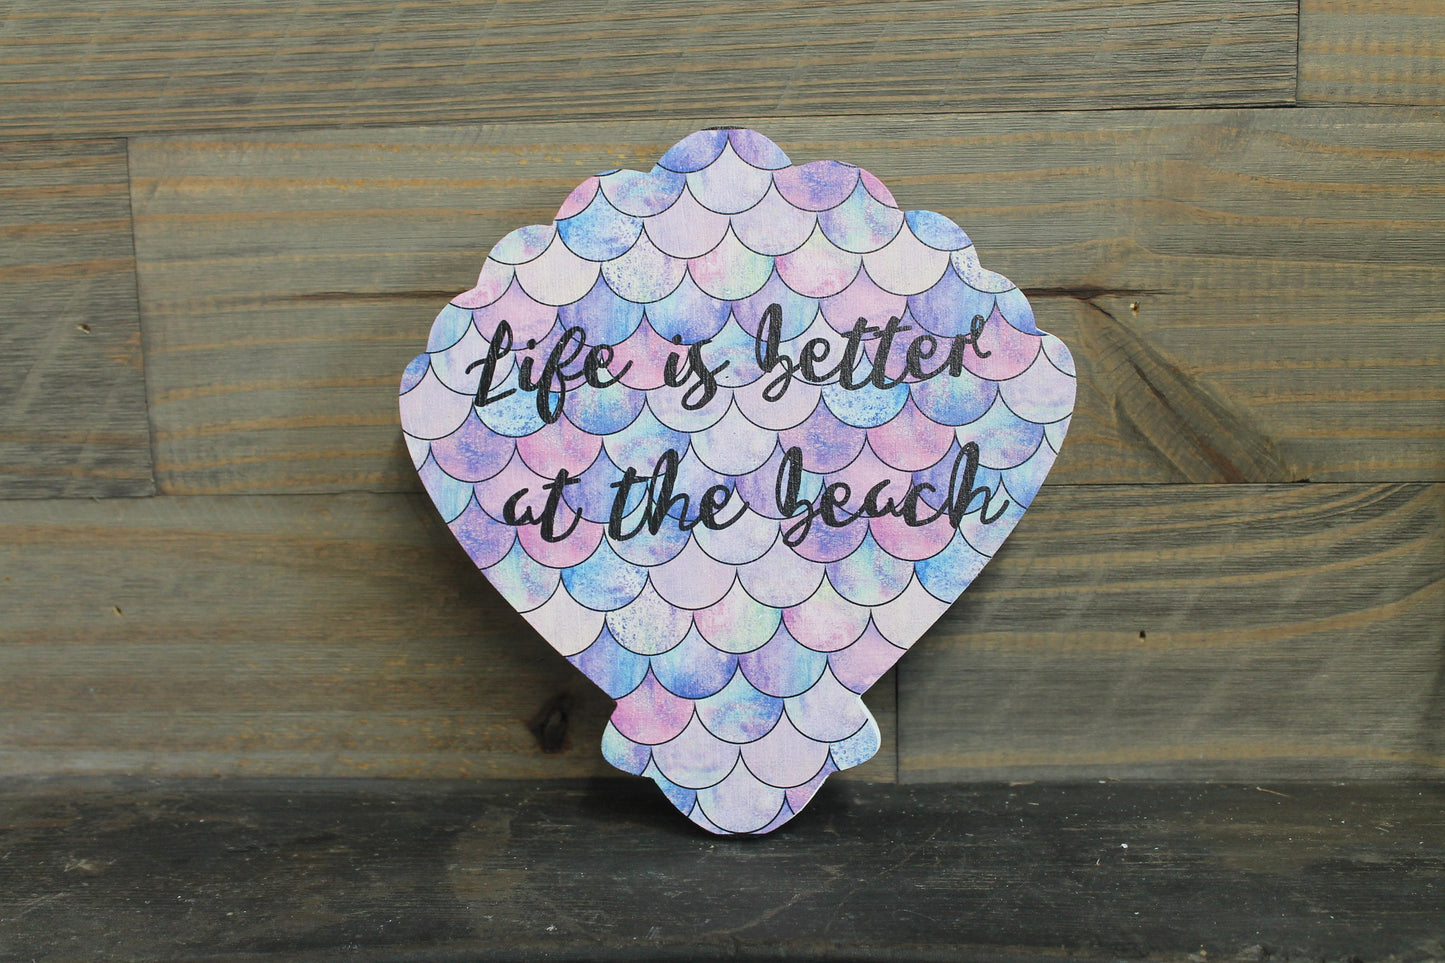 Seashell Printed Wood Decor Life is better at the beach Mermaid Beach Decor Home decor Gift Printed Decoration